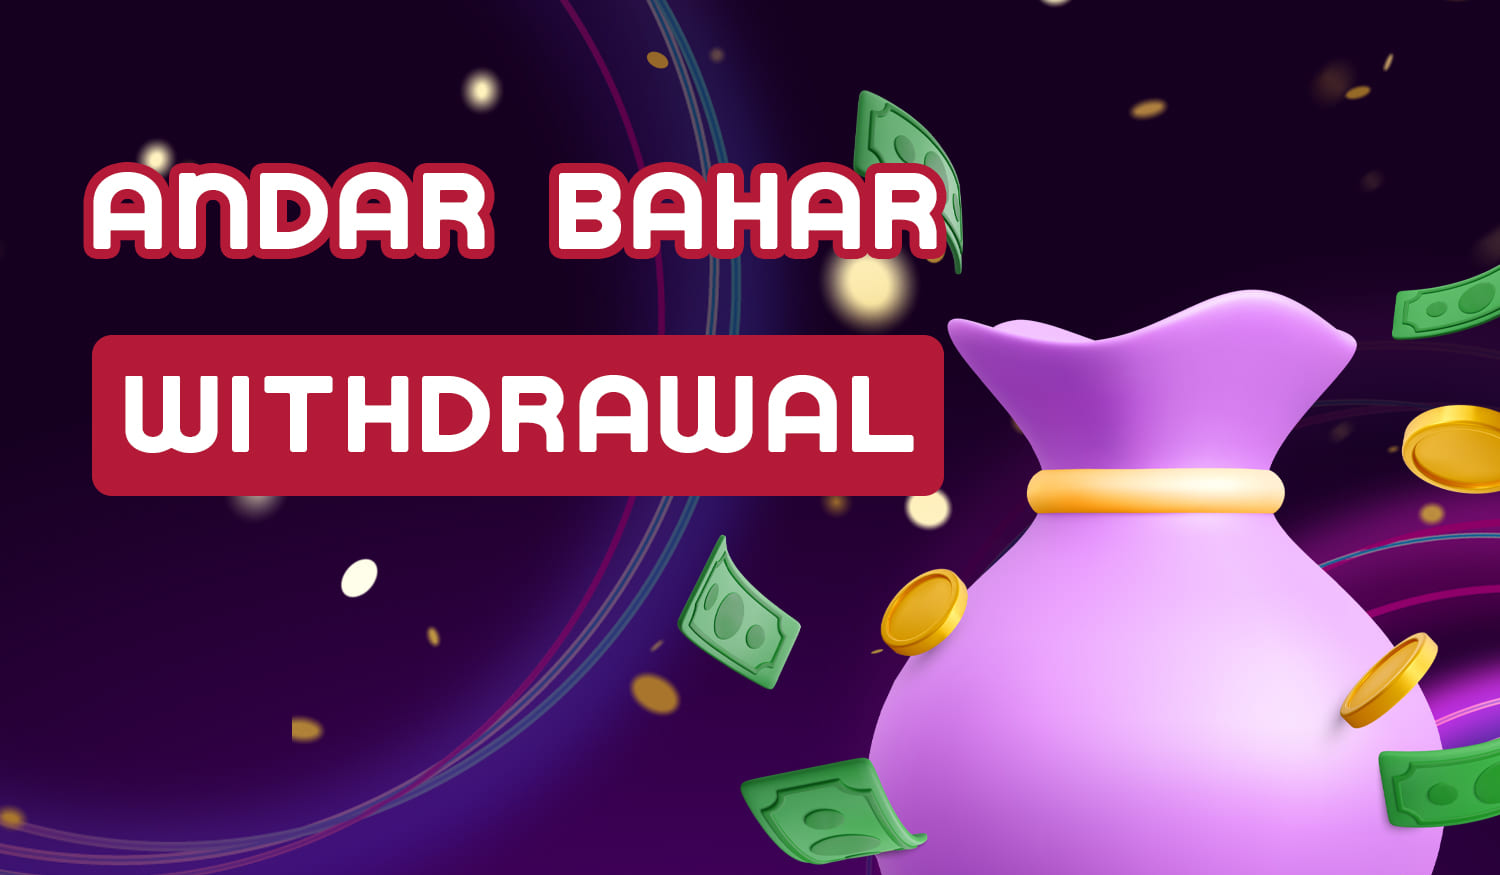 What methods and amounts Indian users can withdraw after playing Andar Bahar online